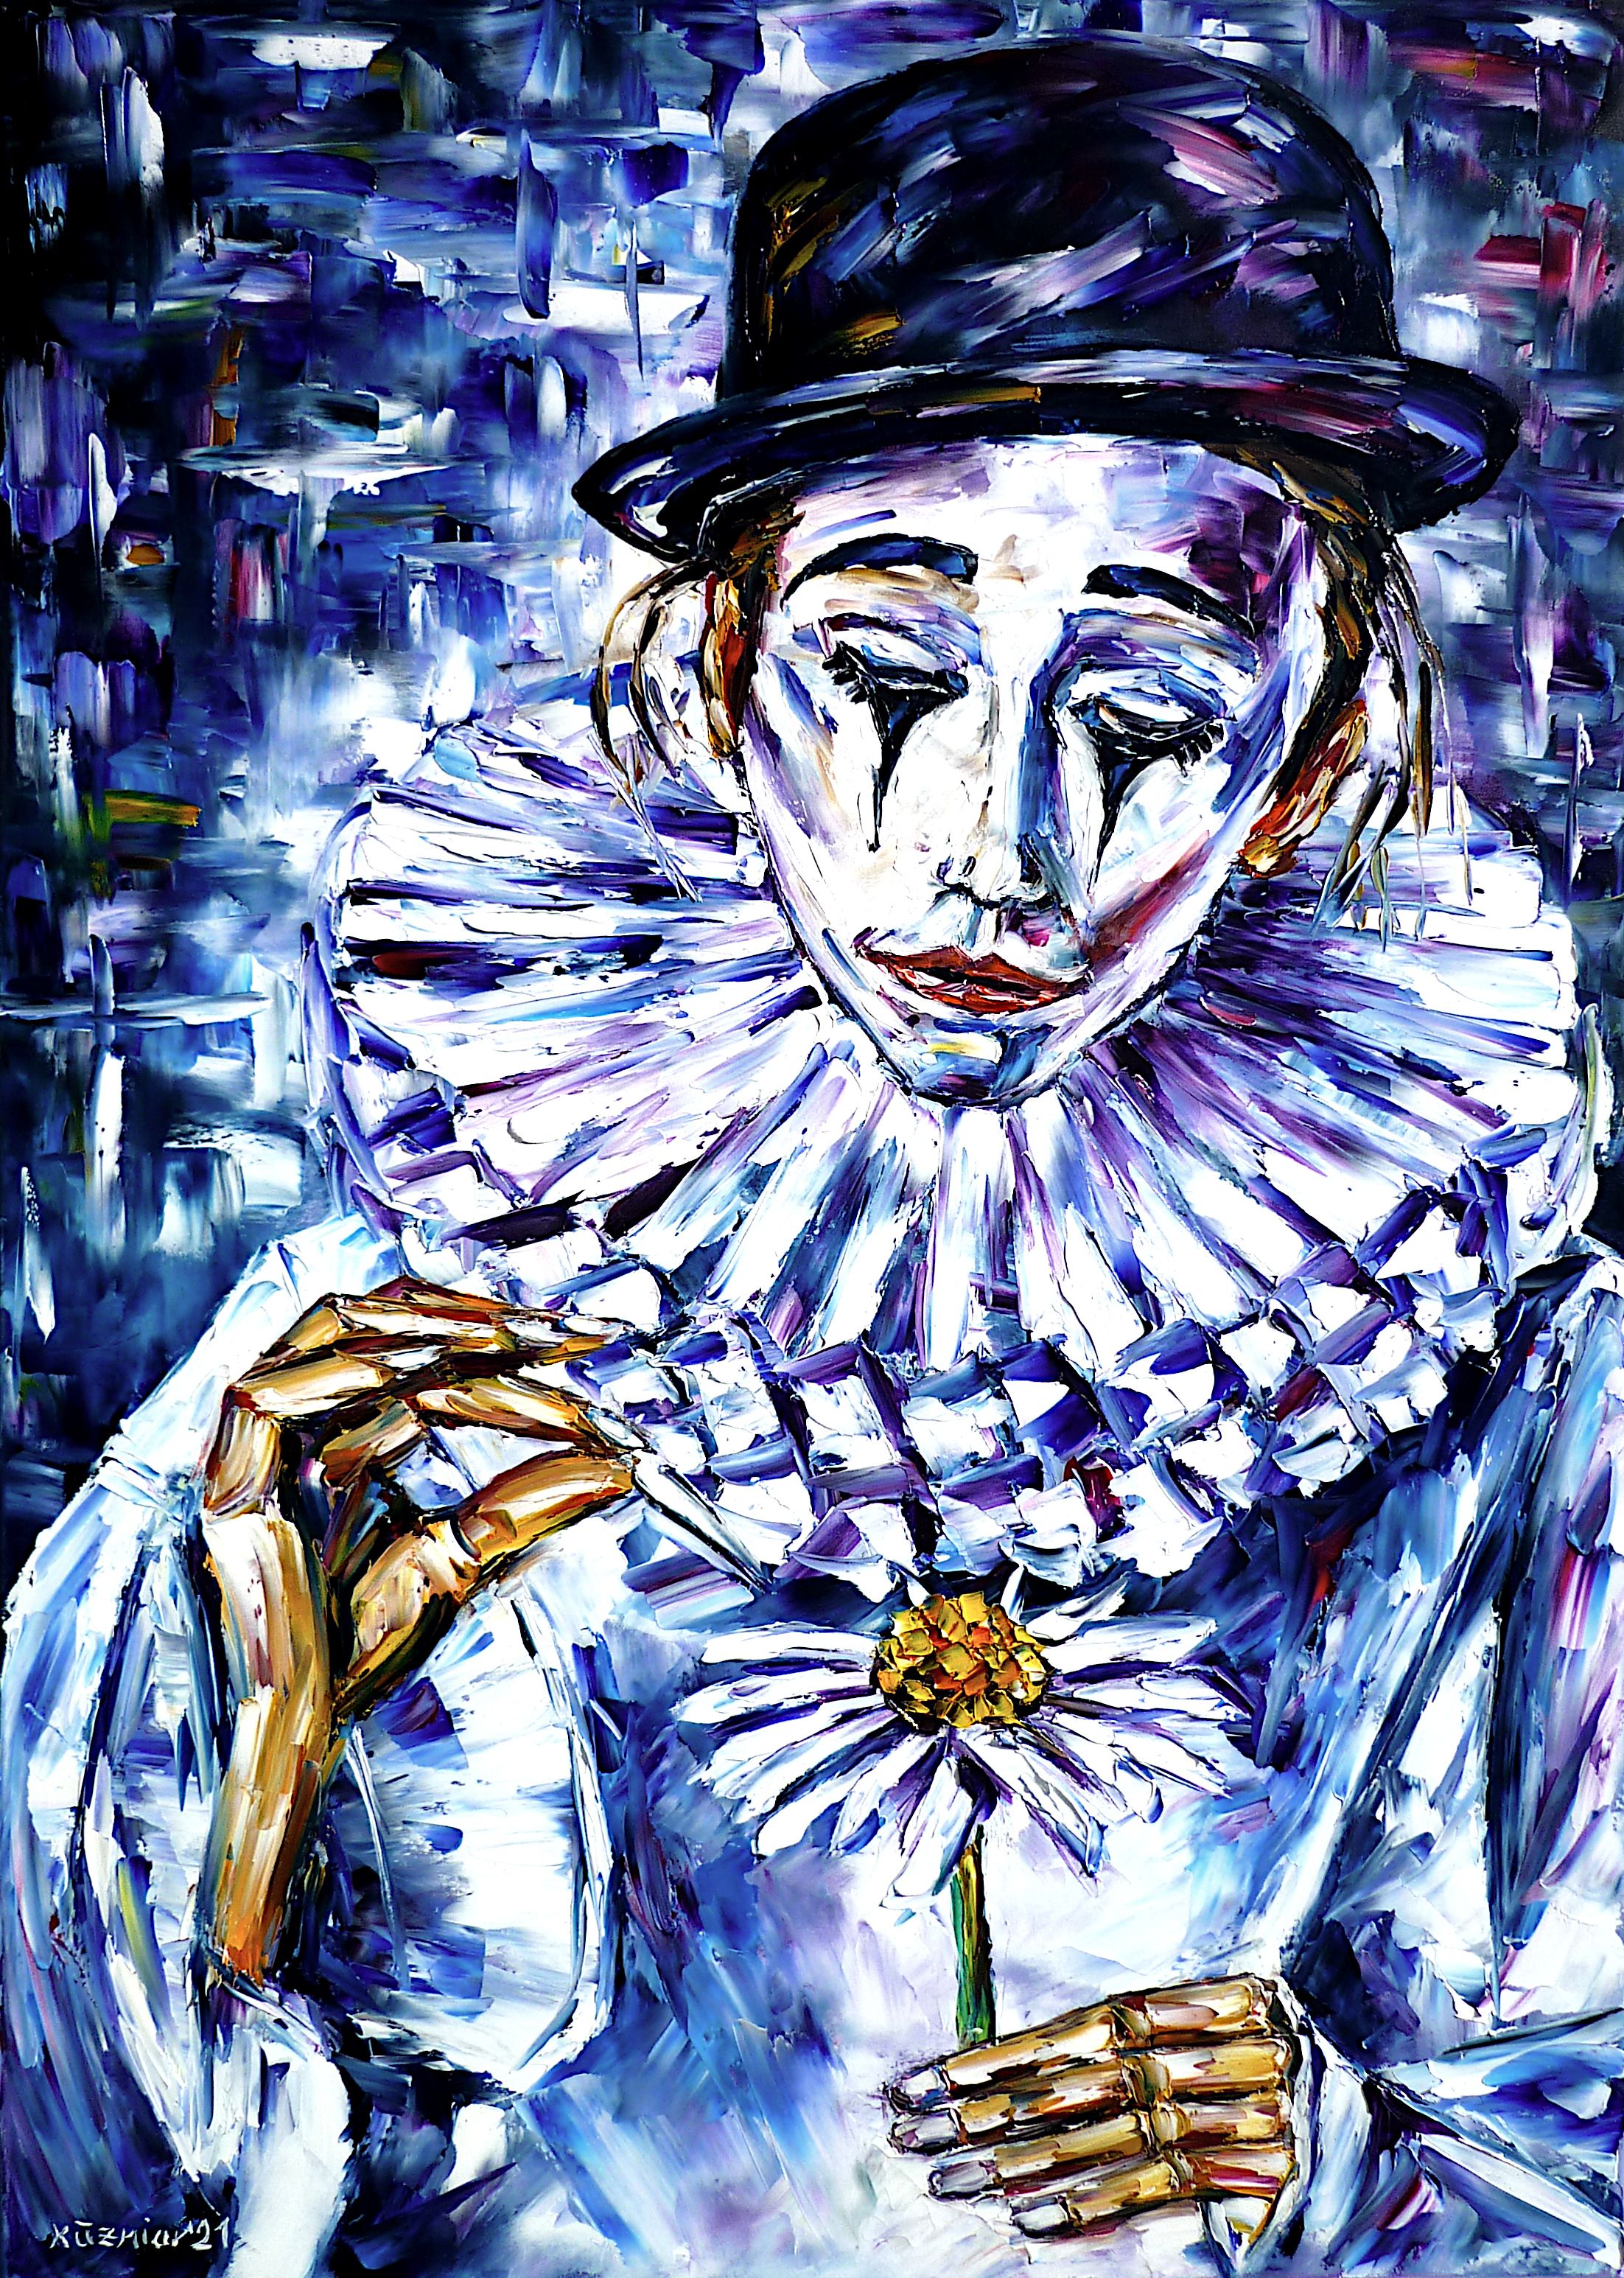 pierrot,pierrotpicture,pierrotpainting,femalepierrot,sadclown,clownwithhat,femaleclown,clownpainting,clownwithflower,pierrotwithflower,femalemimearist,pantomime,circus,sadness,grief,sadperson,sadpeople,sadface,clownface,helovesme,helovesmenot,shelovesme,shedoesn'tloveme,pierrotwithhat,sadeyes,whiteface,clownlove,iloveclowns,circuslove,brightpainting,peacefulpainting,cheerfulpainting,friendlyscene,friendlypainting,paletteknifeoilpainting,modernart,impressionism,expressionism,figurative,abstractpainting,livelypainting,colorfulpainting,livelycolours,brightcolors,lightreflections,impastopainting,livingroompainting,livingroomart